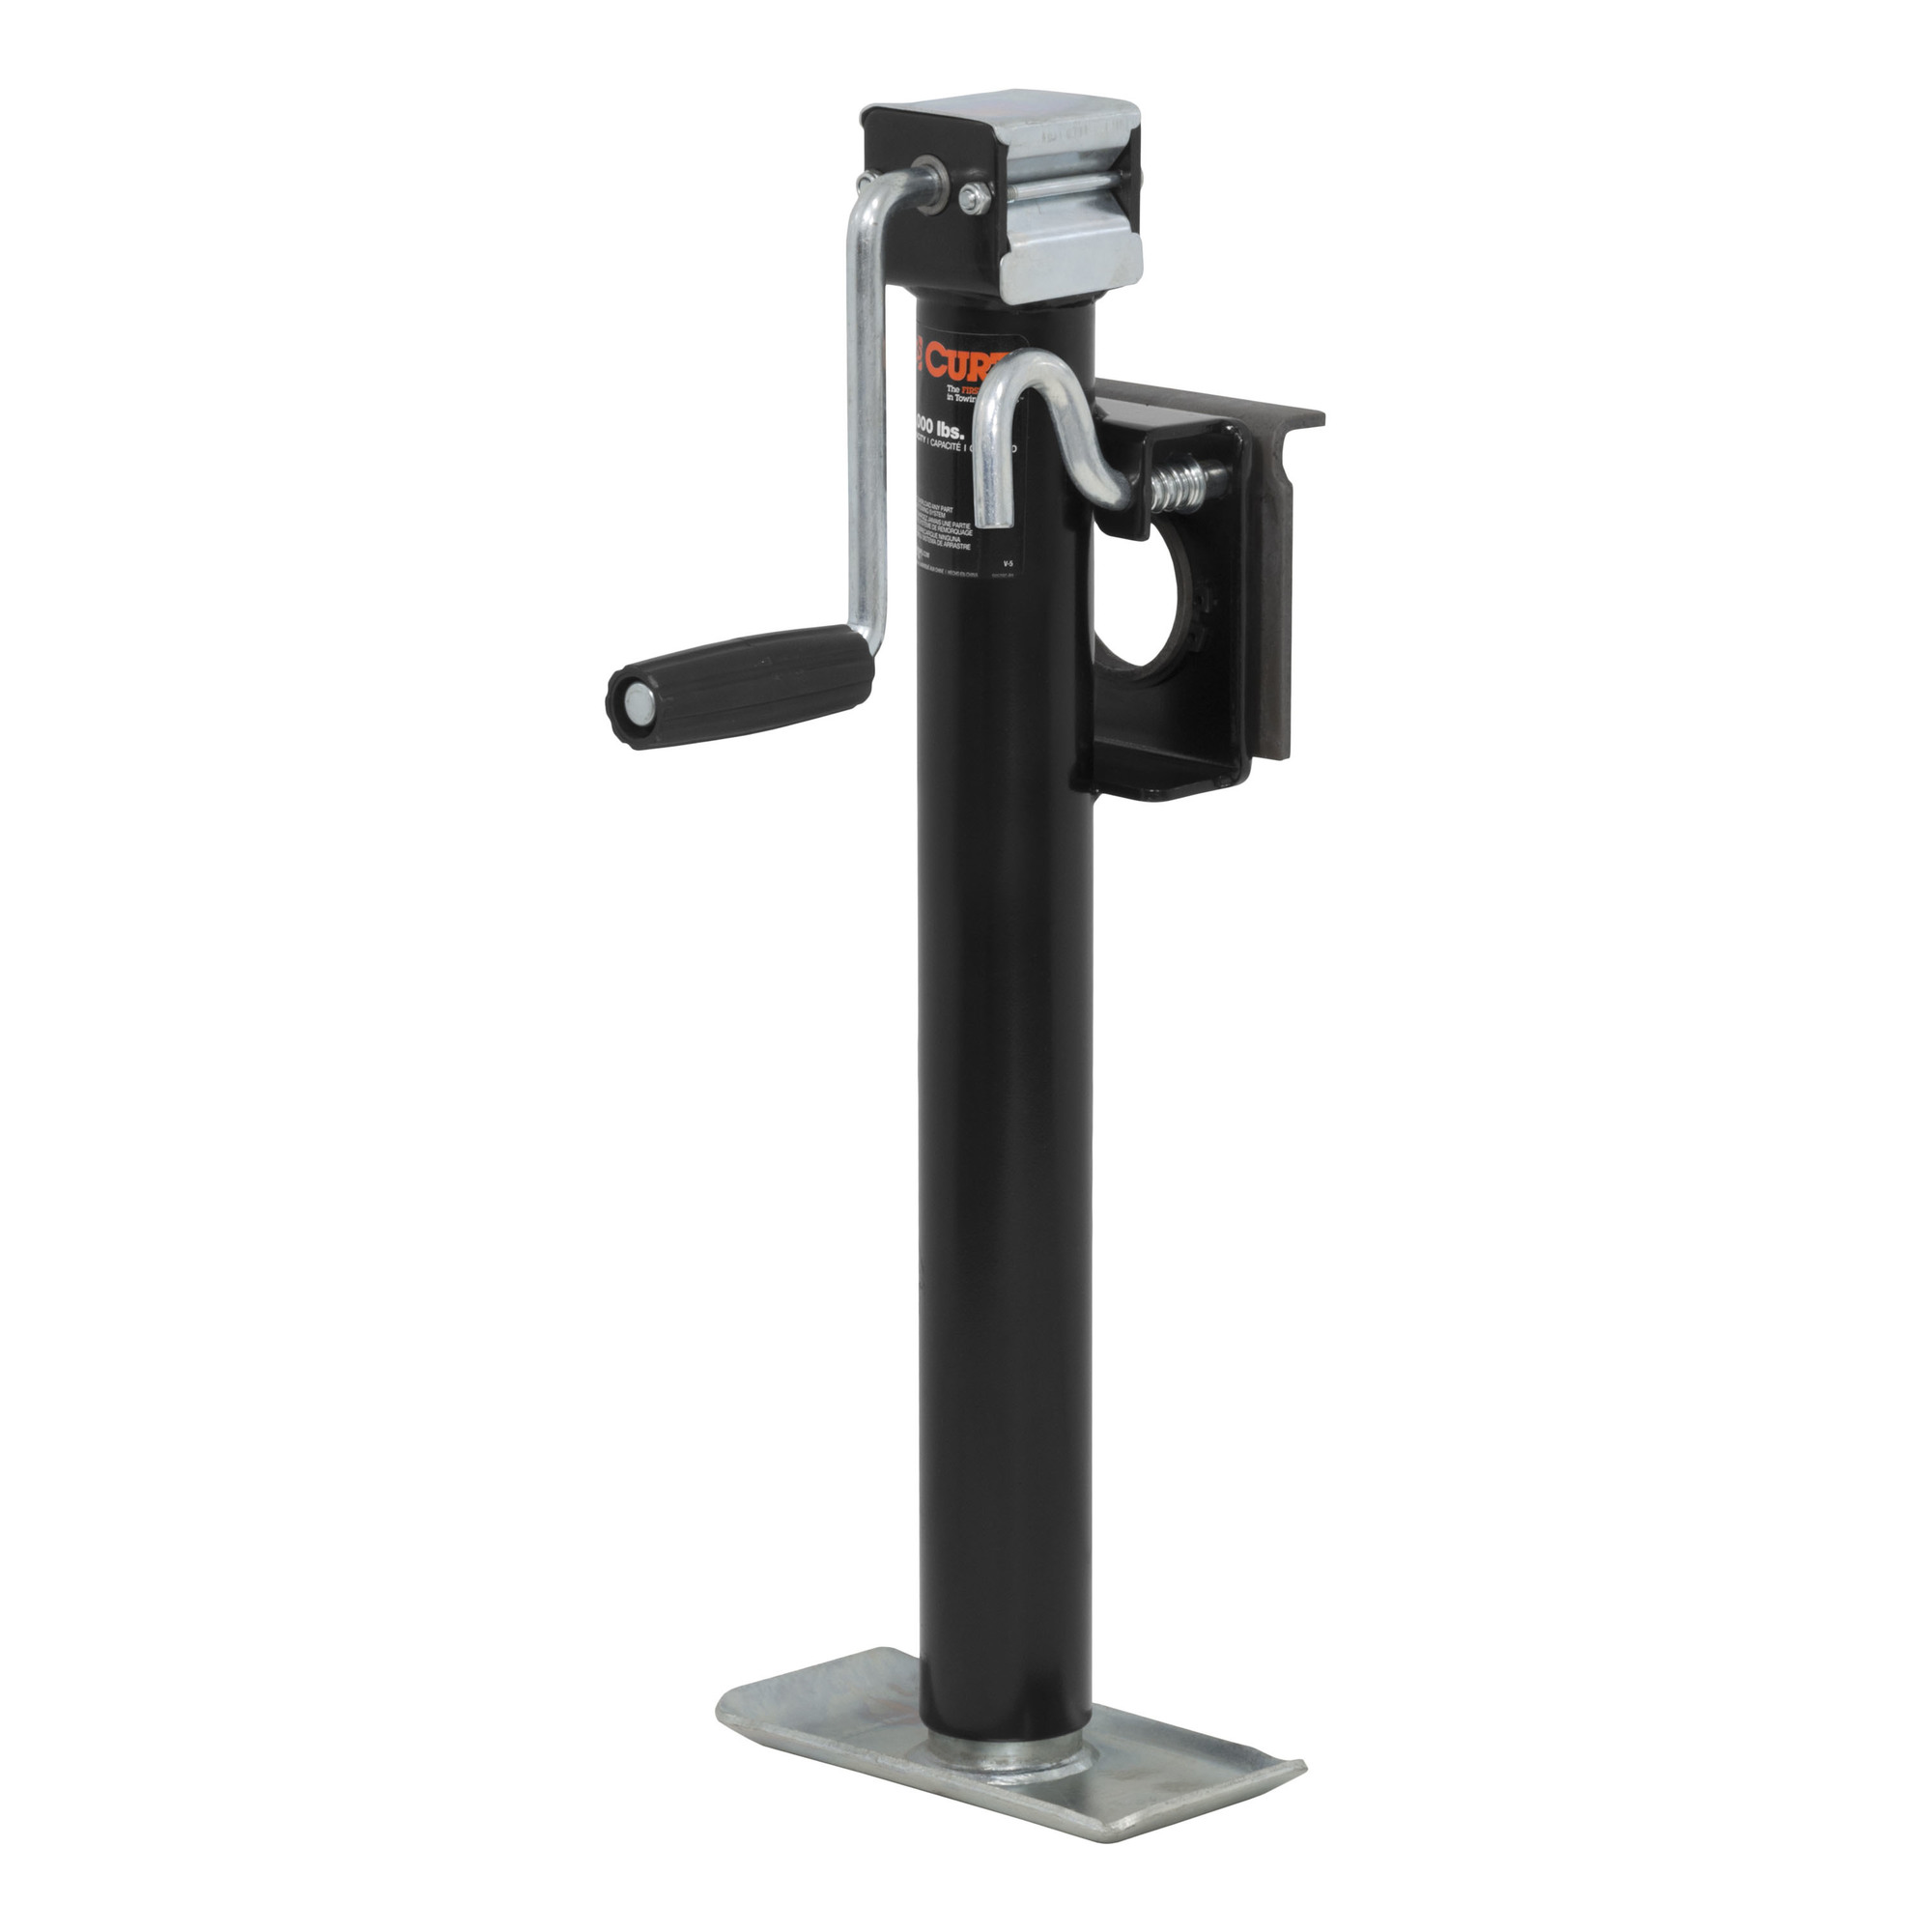 Curt Manufacturing, Bracket-Mnt Jack w Side Handle 2000 lbs 15Inch Travel, Lift Capacity 2000 lb, Jack Type Sidewind, Mount Type Weld-On, Model 28306